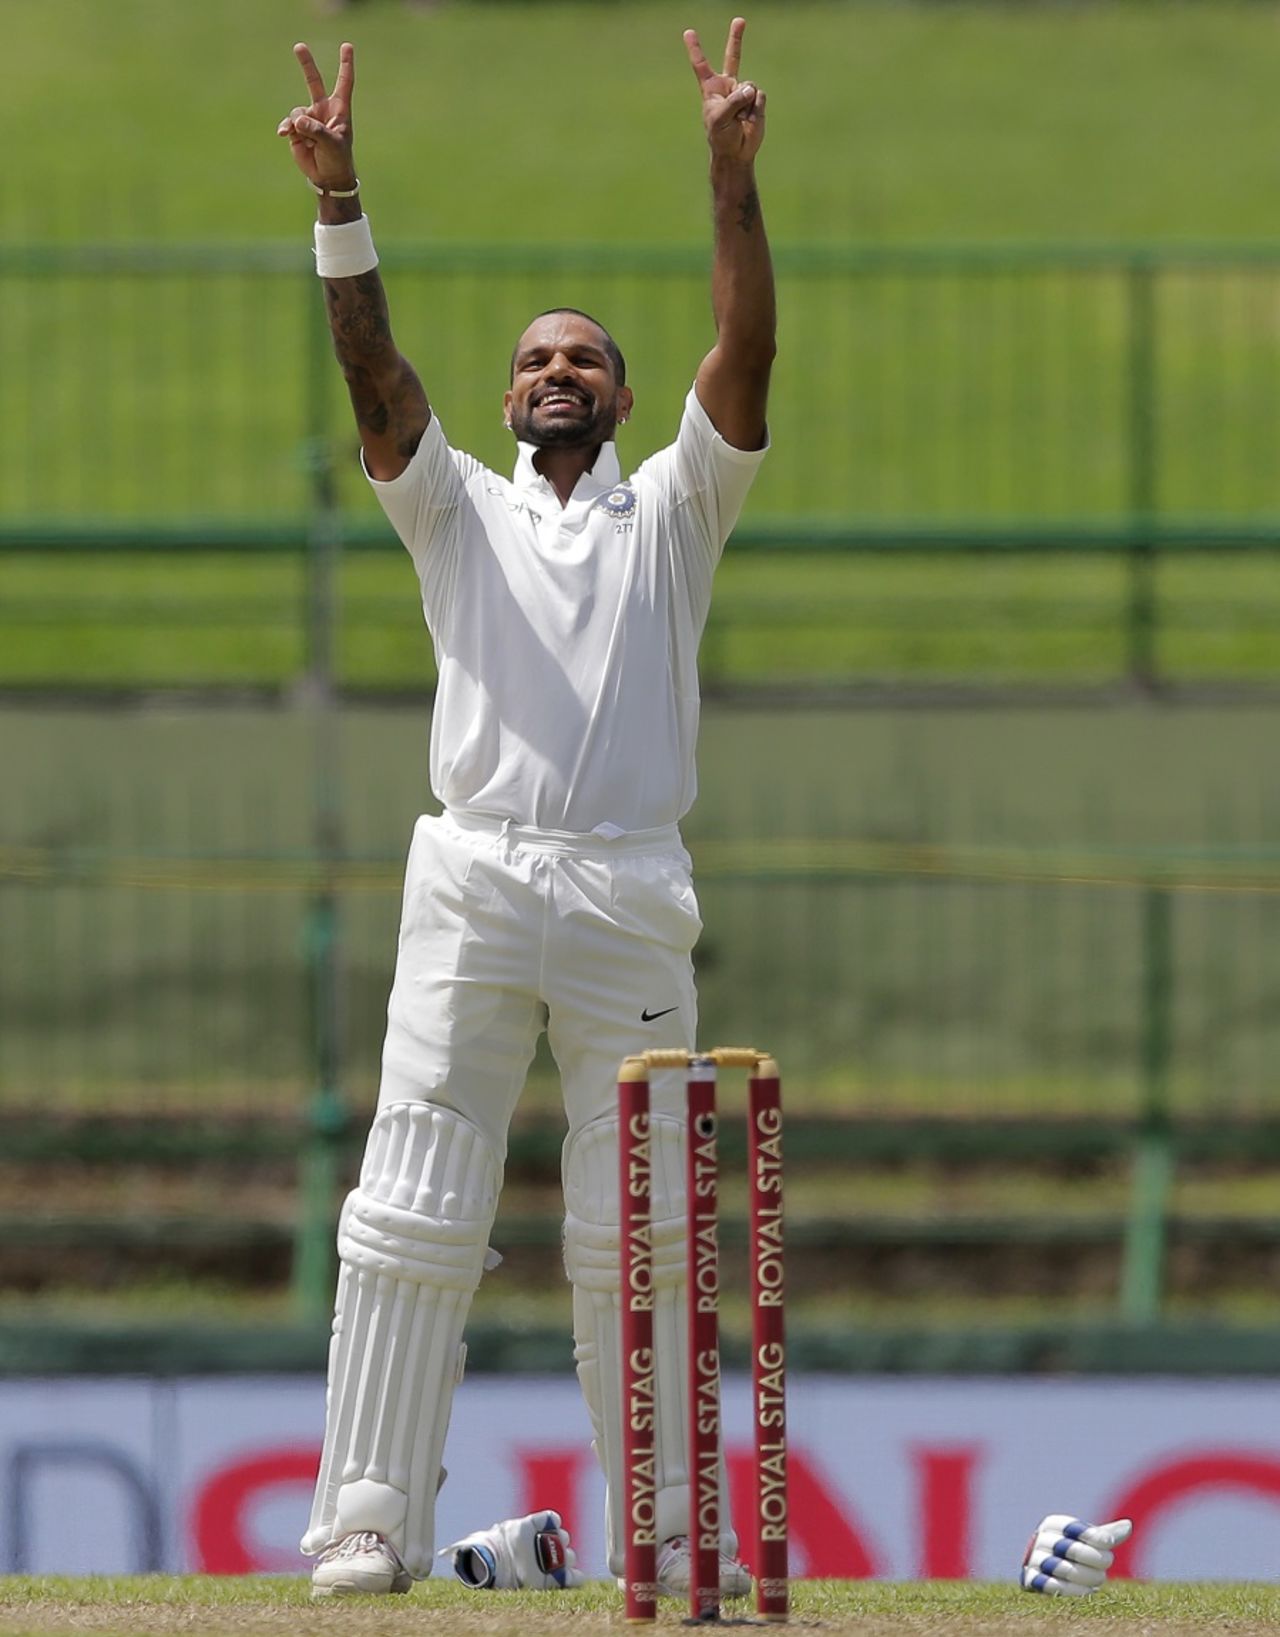 Shikhar Dhawan celebrated his sixth Test hundred with a peace out (or victory?) gesture at the Indian team dressing room, Sri Lanka v India, 3rd Test, 1st day, Pallekele, August 12, 2017